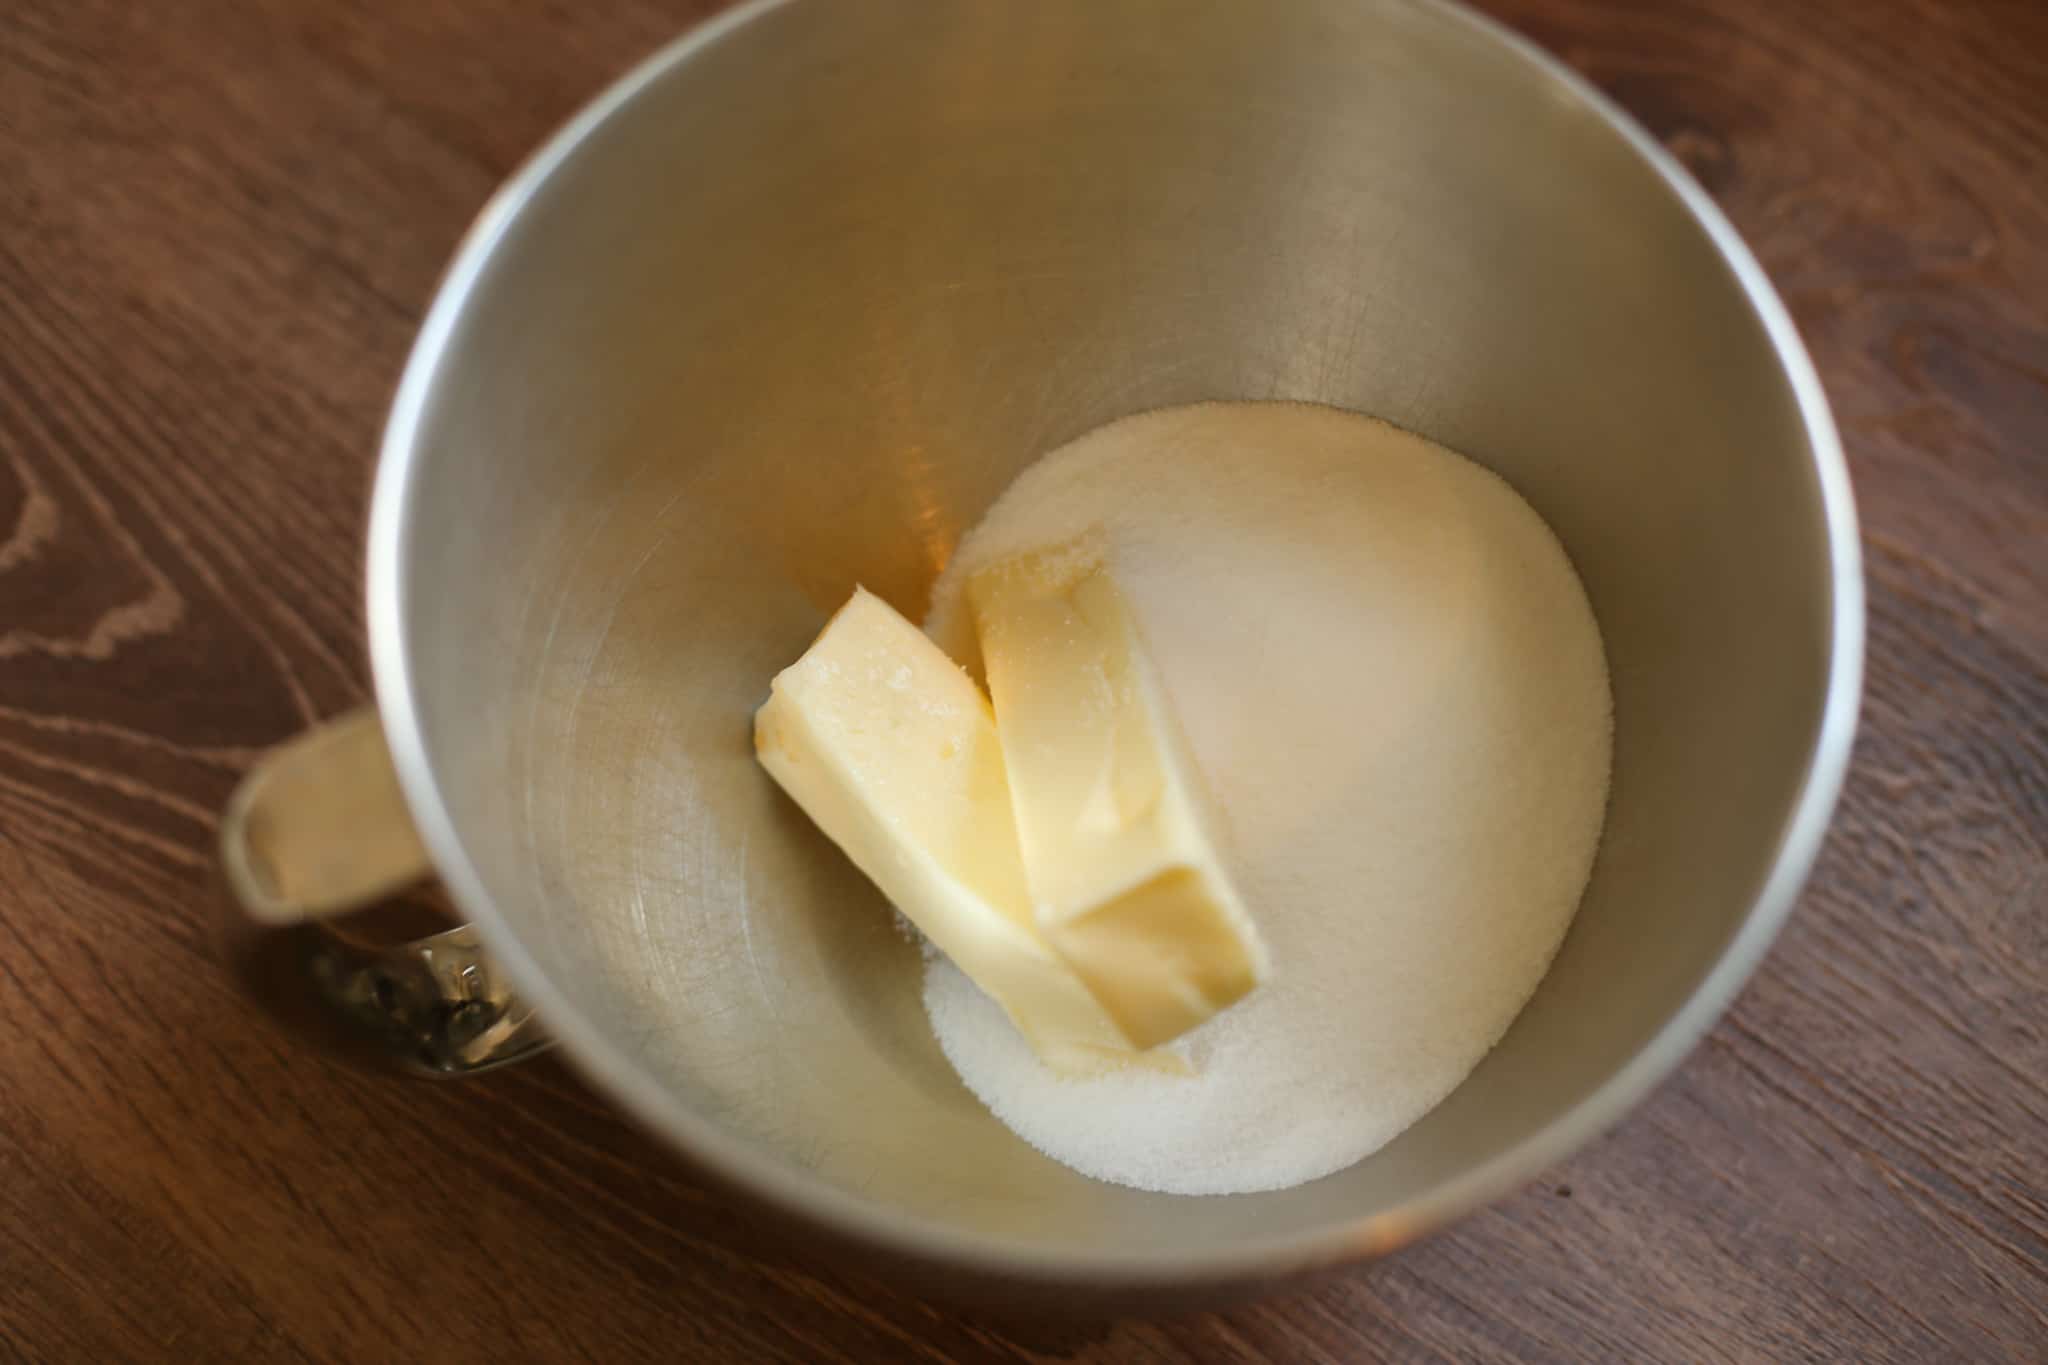 Sugar and two sticks of butter in a metal mixing bowl.